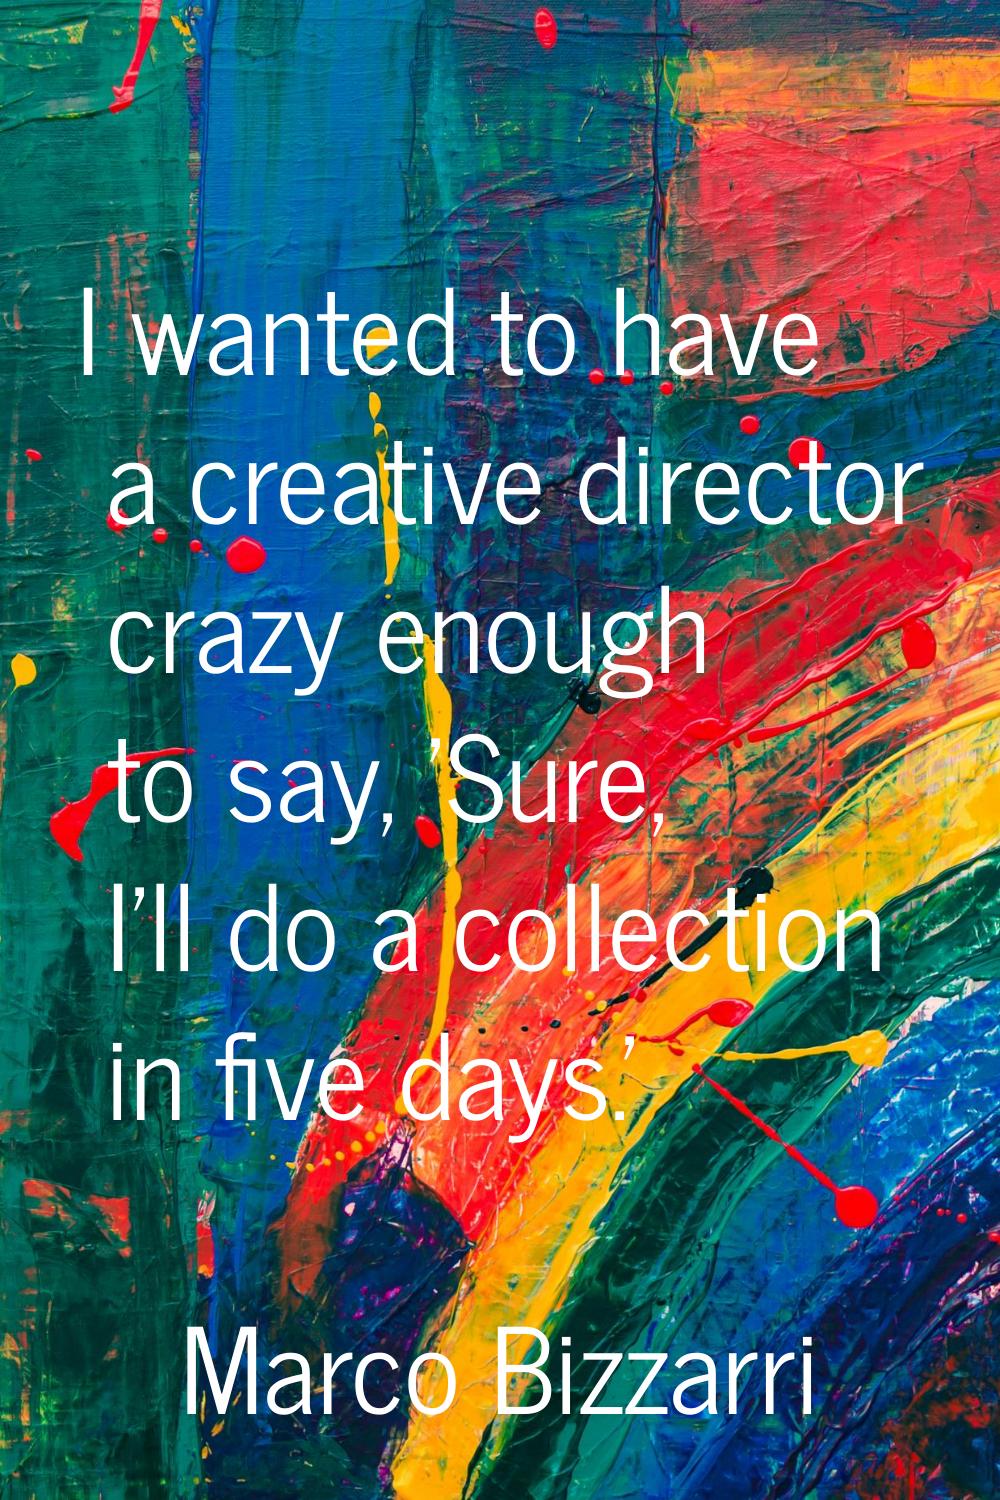 I wanted to have a creative director crazy enough to say, 'Sure, I'll do a collection in five days.